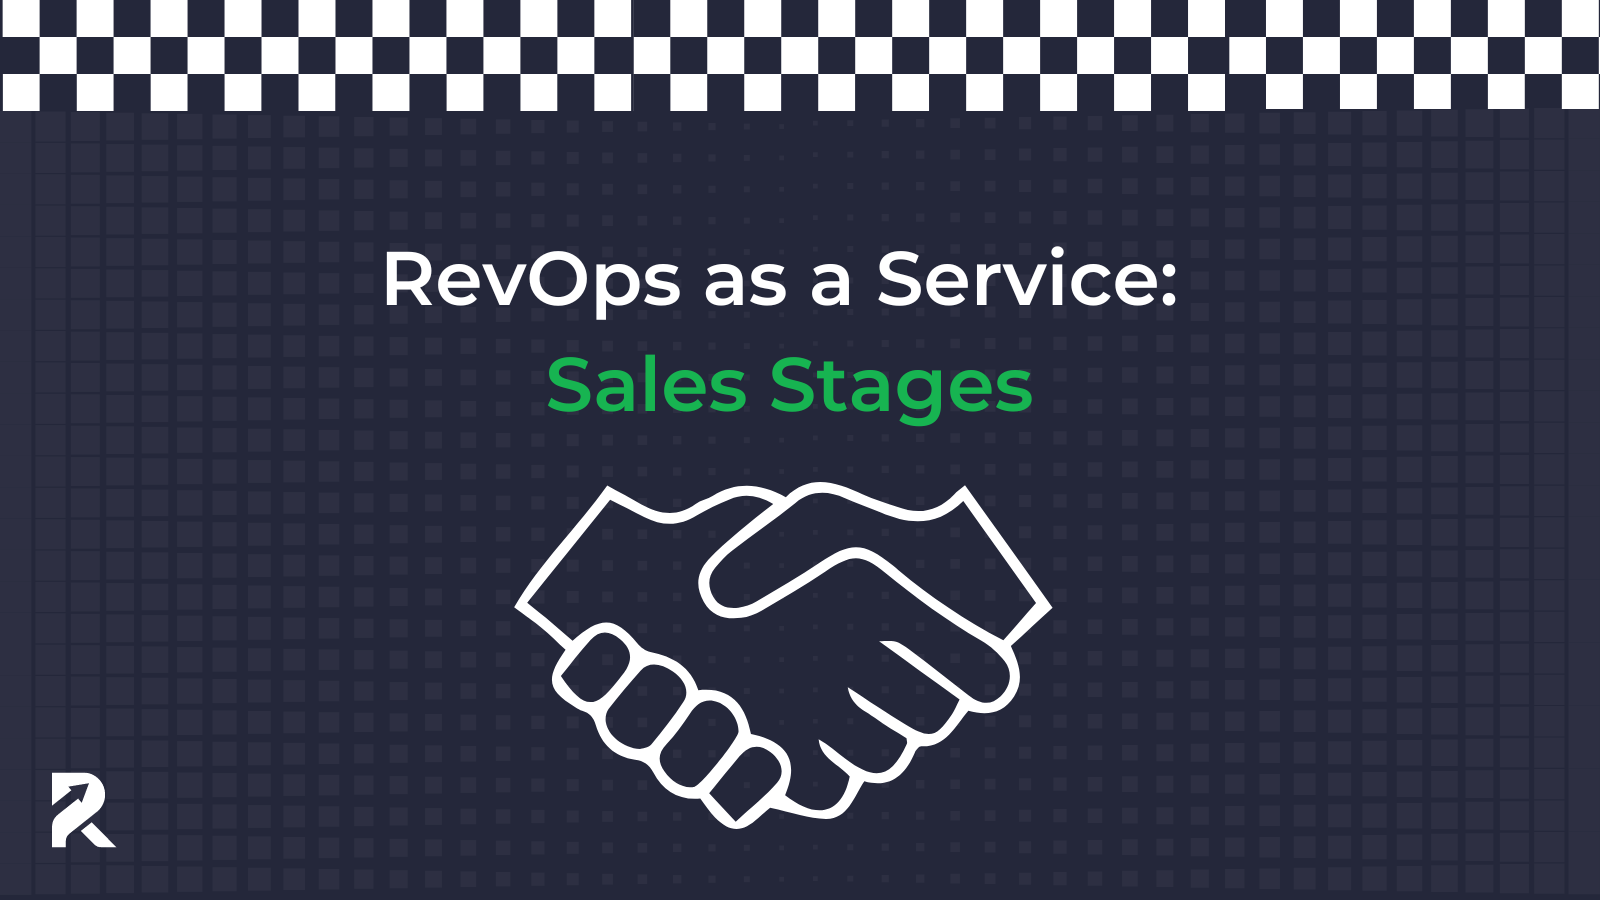 revops as a service sales stages